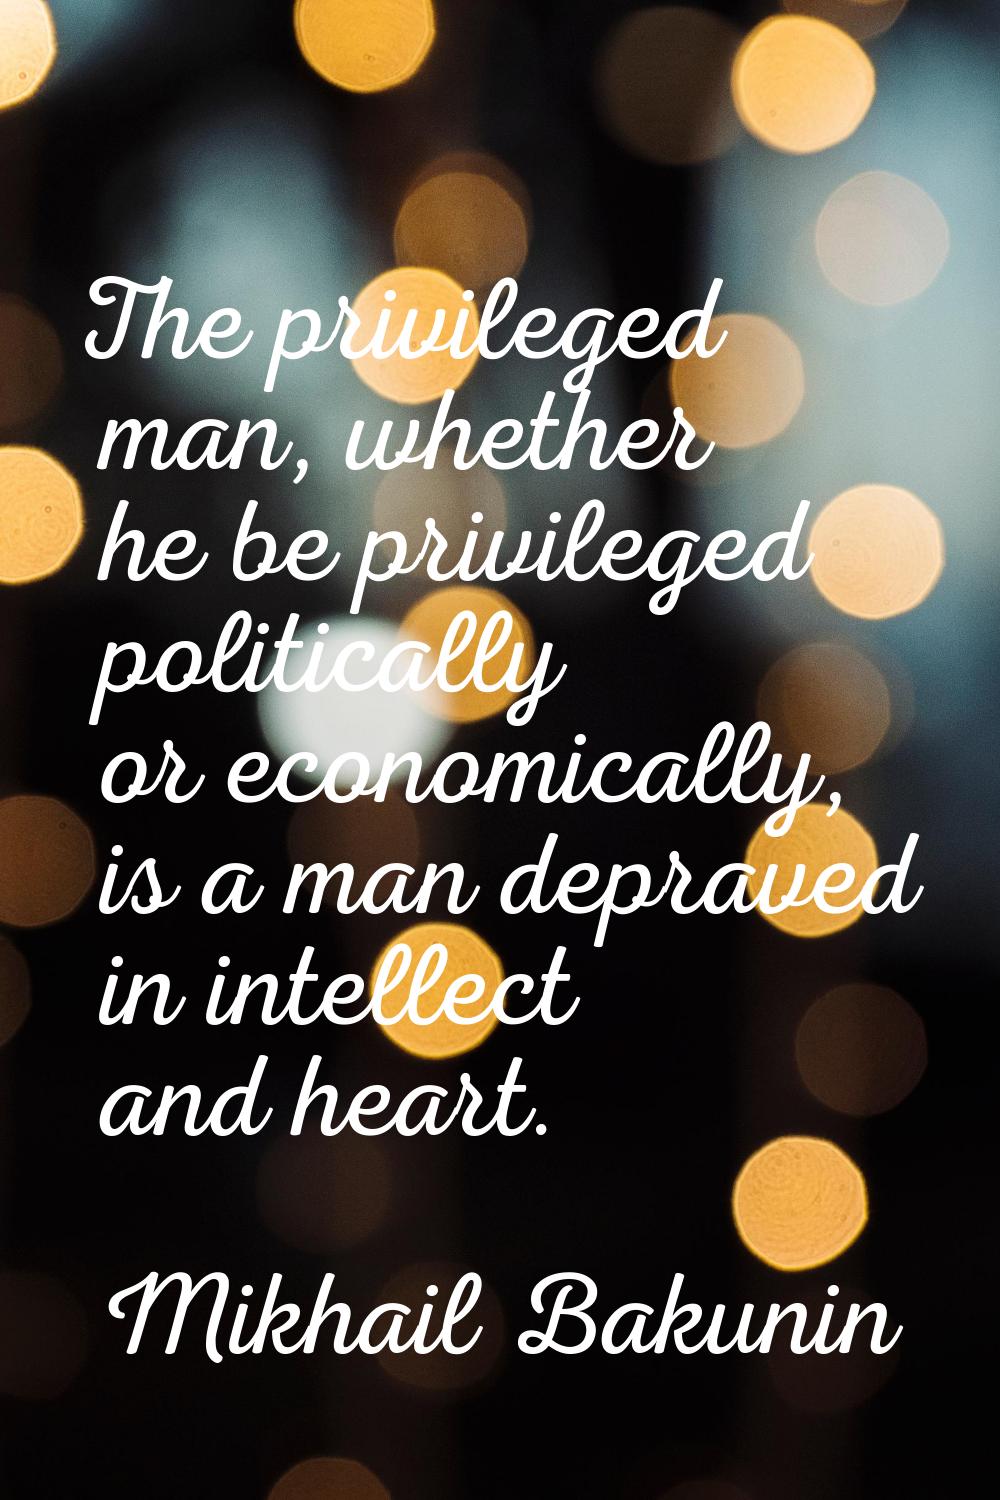 The privileged man, whether he be privileged politically or economically, is a man depraved in inte